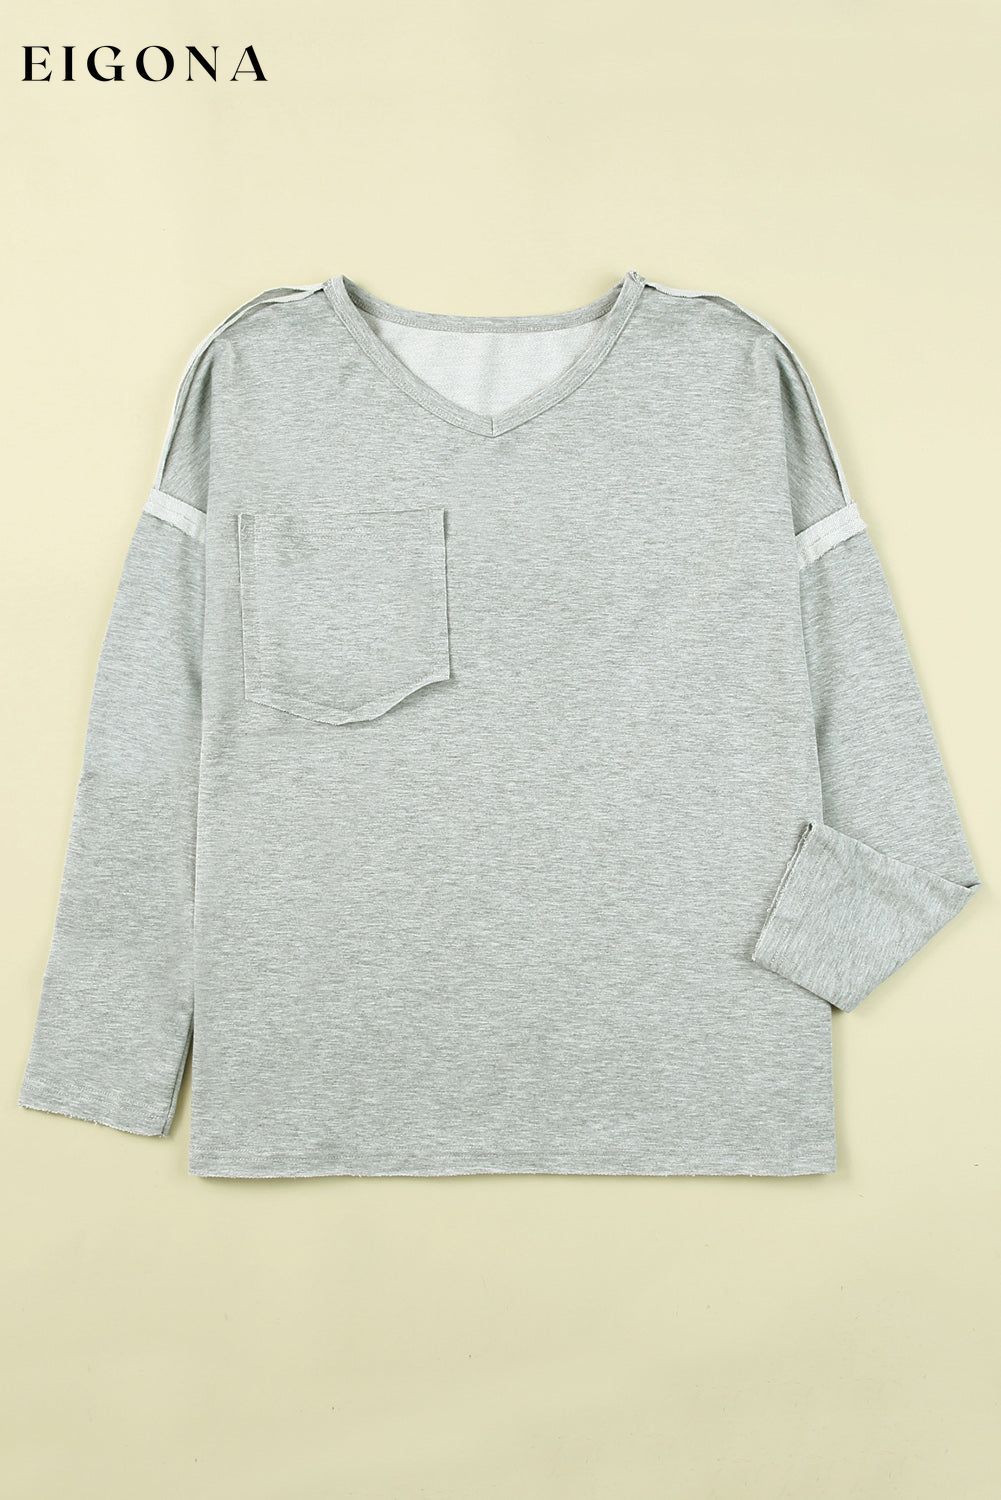 Gray Pocketed Oversized Drop Sleeve Top All In Stock clothes Craft Patchwork DL Exclusive Hot picks long sleeve shirts long sleeve top Occasion Daily Season Fall & Autumn Style Casual tops